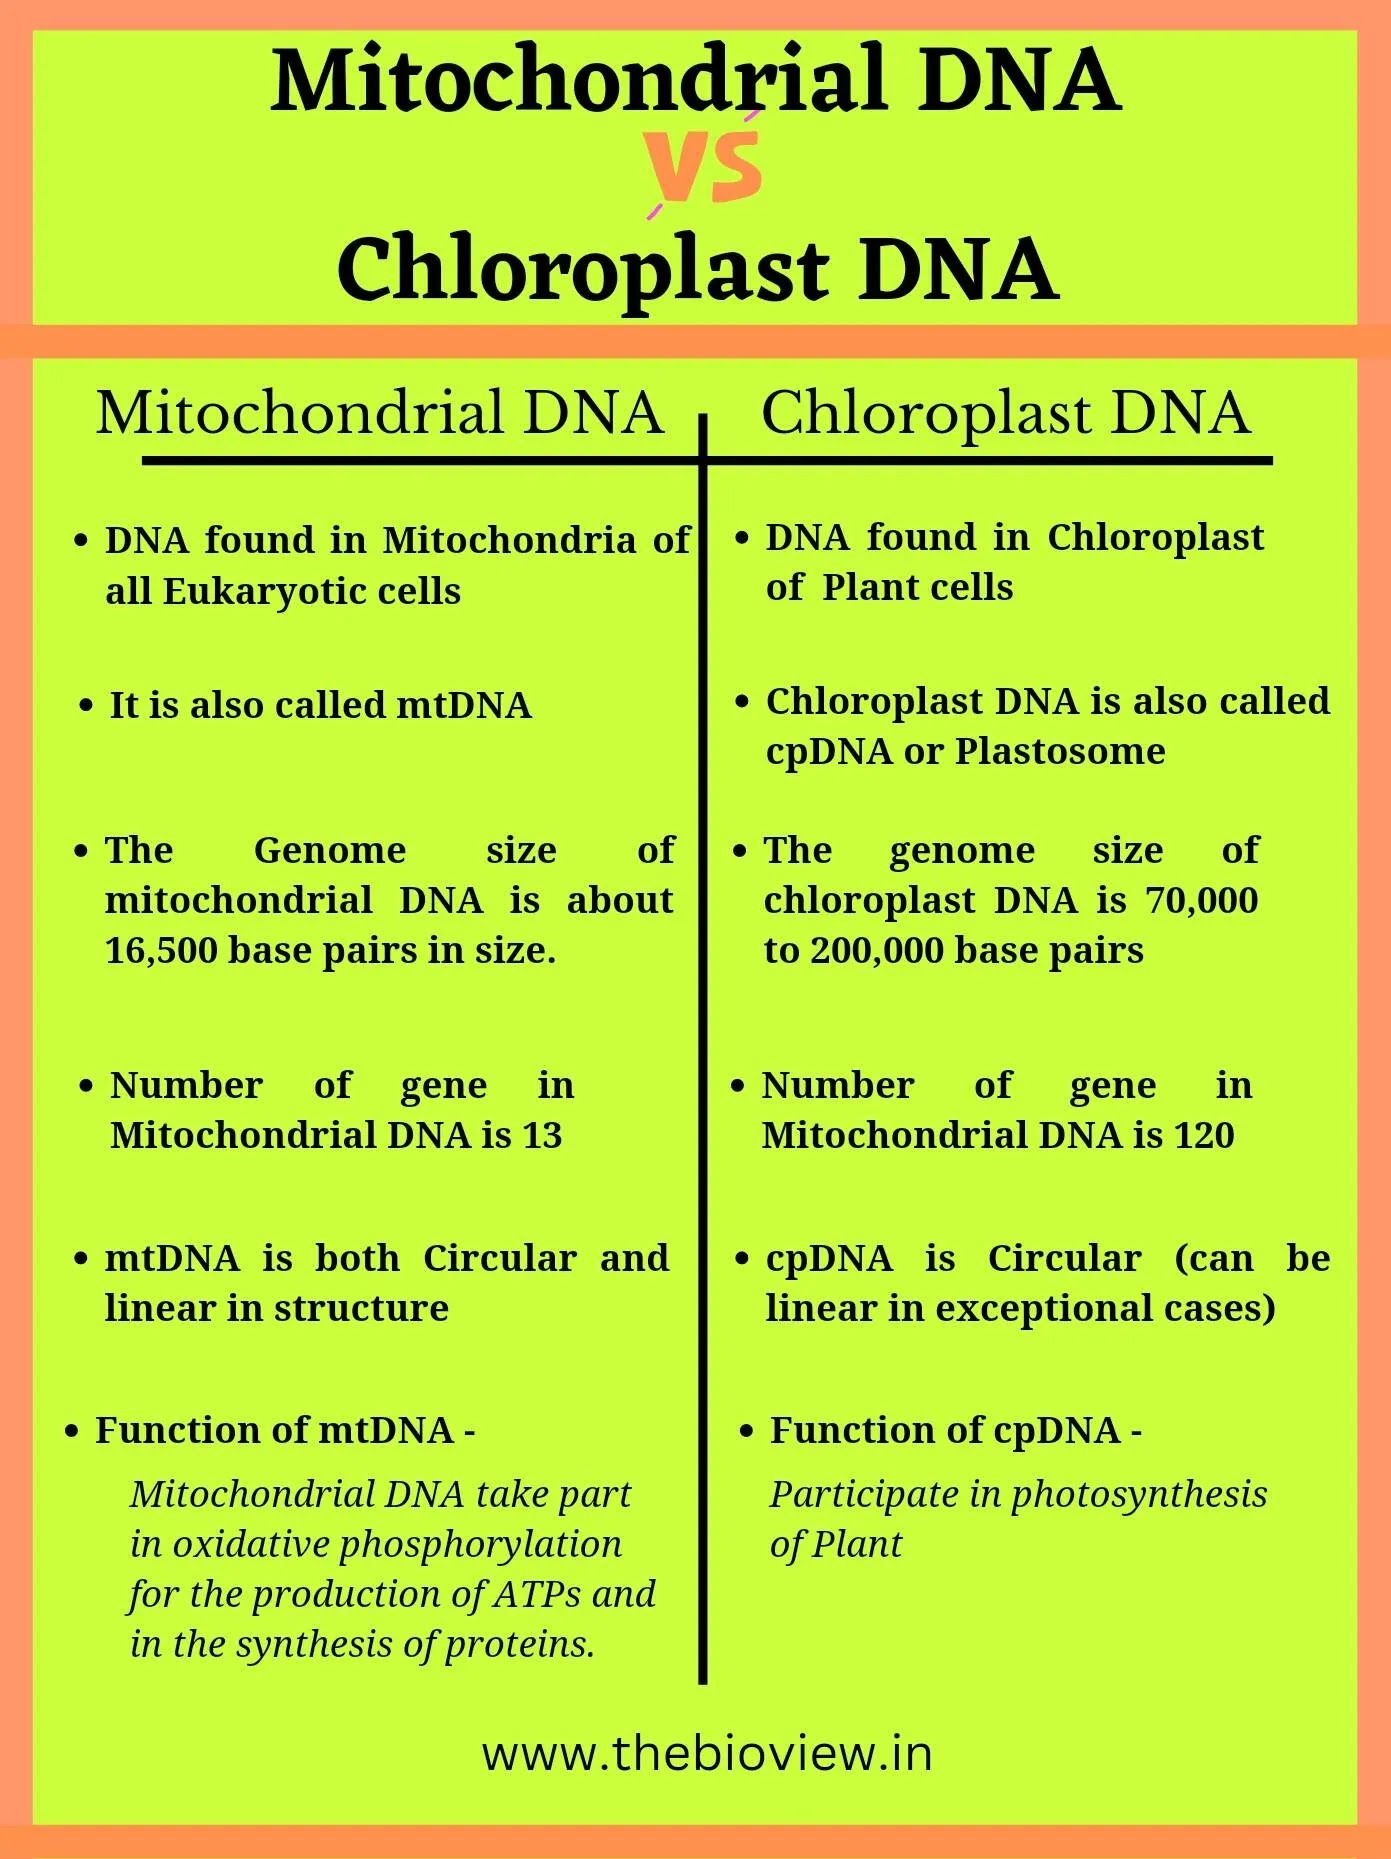 Difference Between Mitochondrial DNA and Chloroplast DNA in tubular form